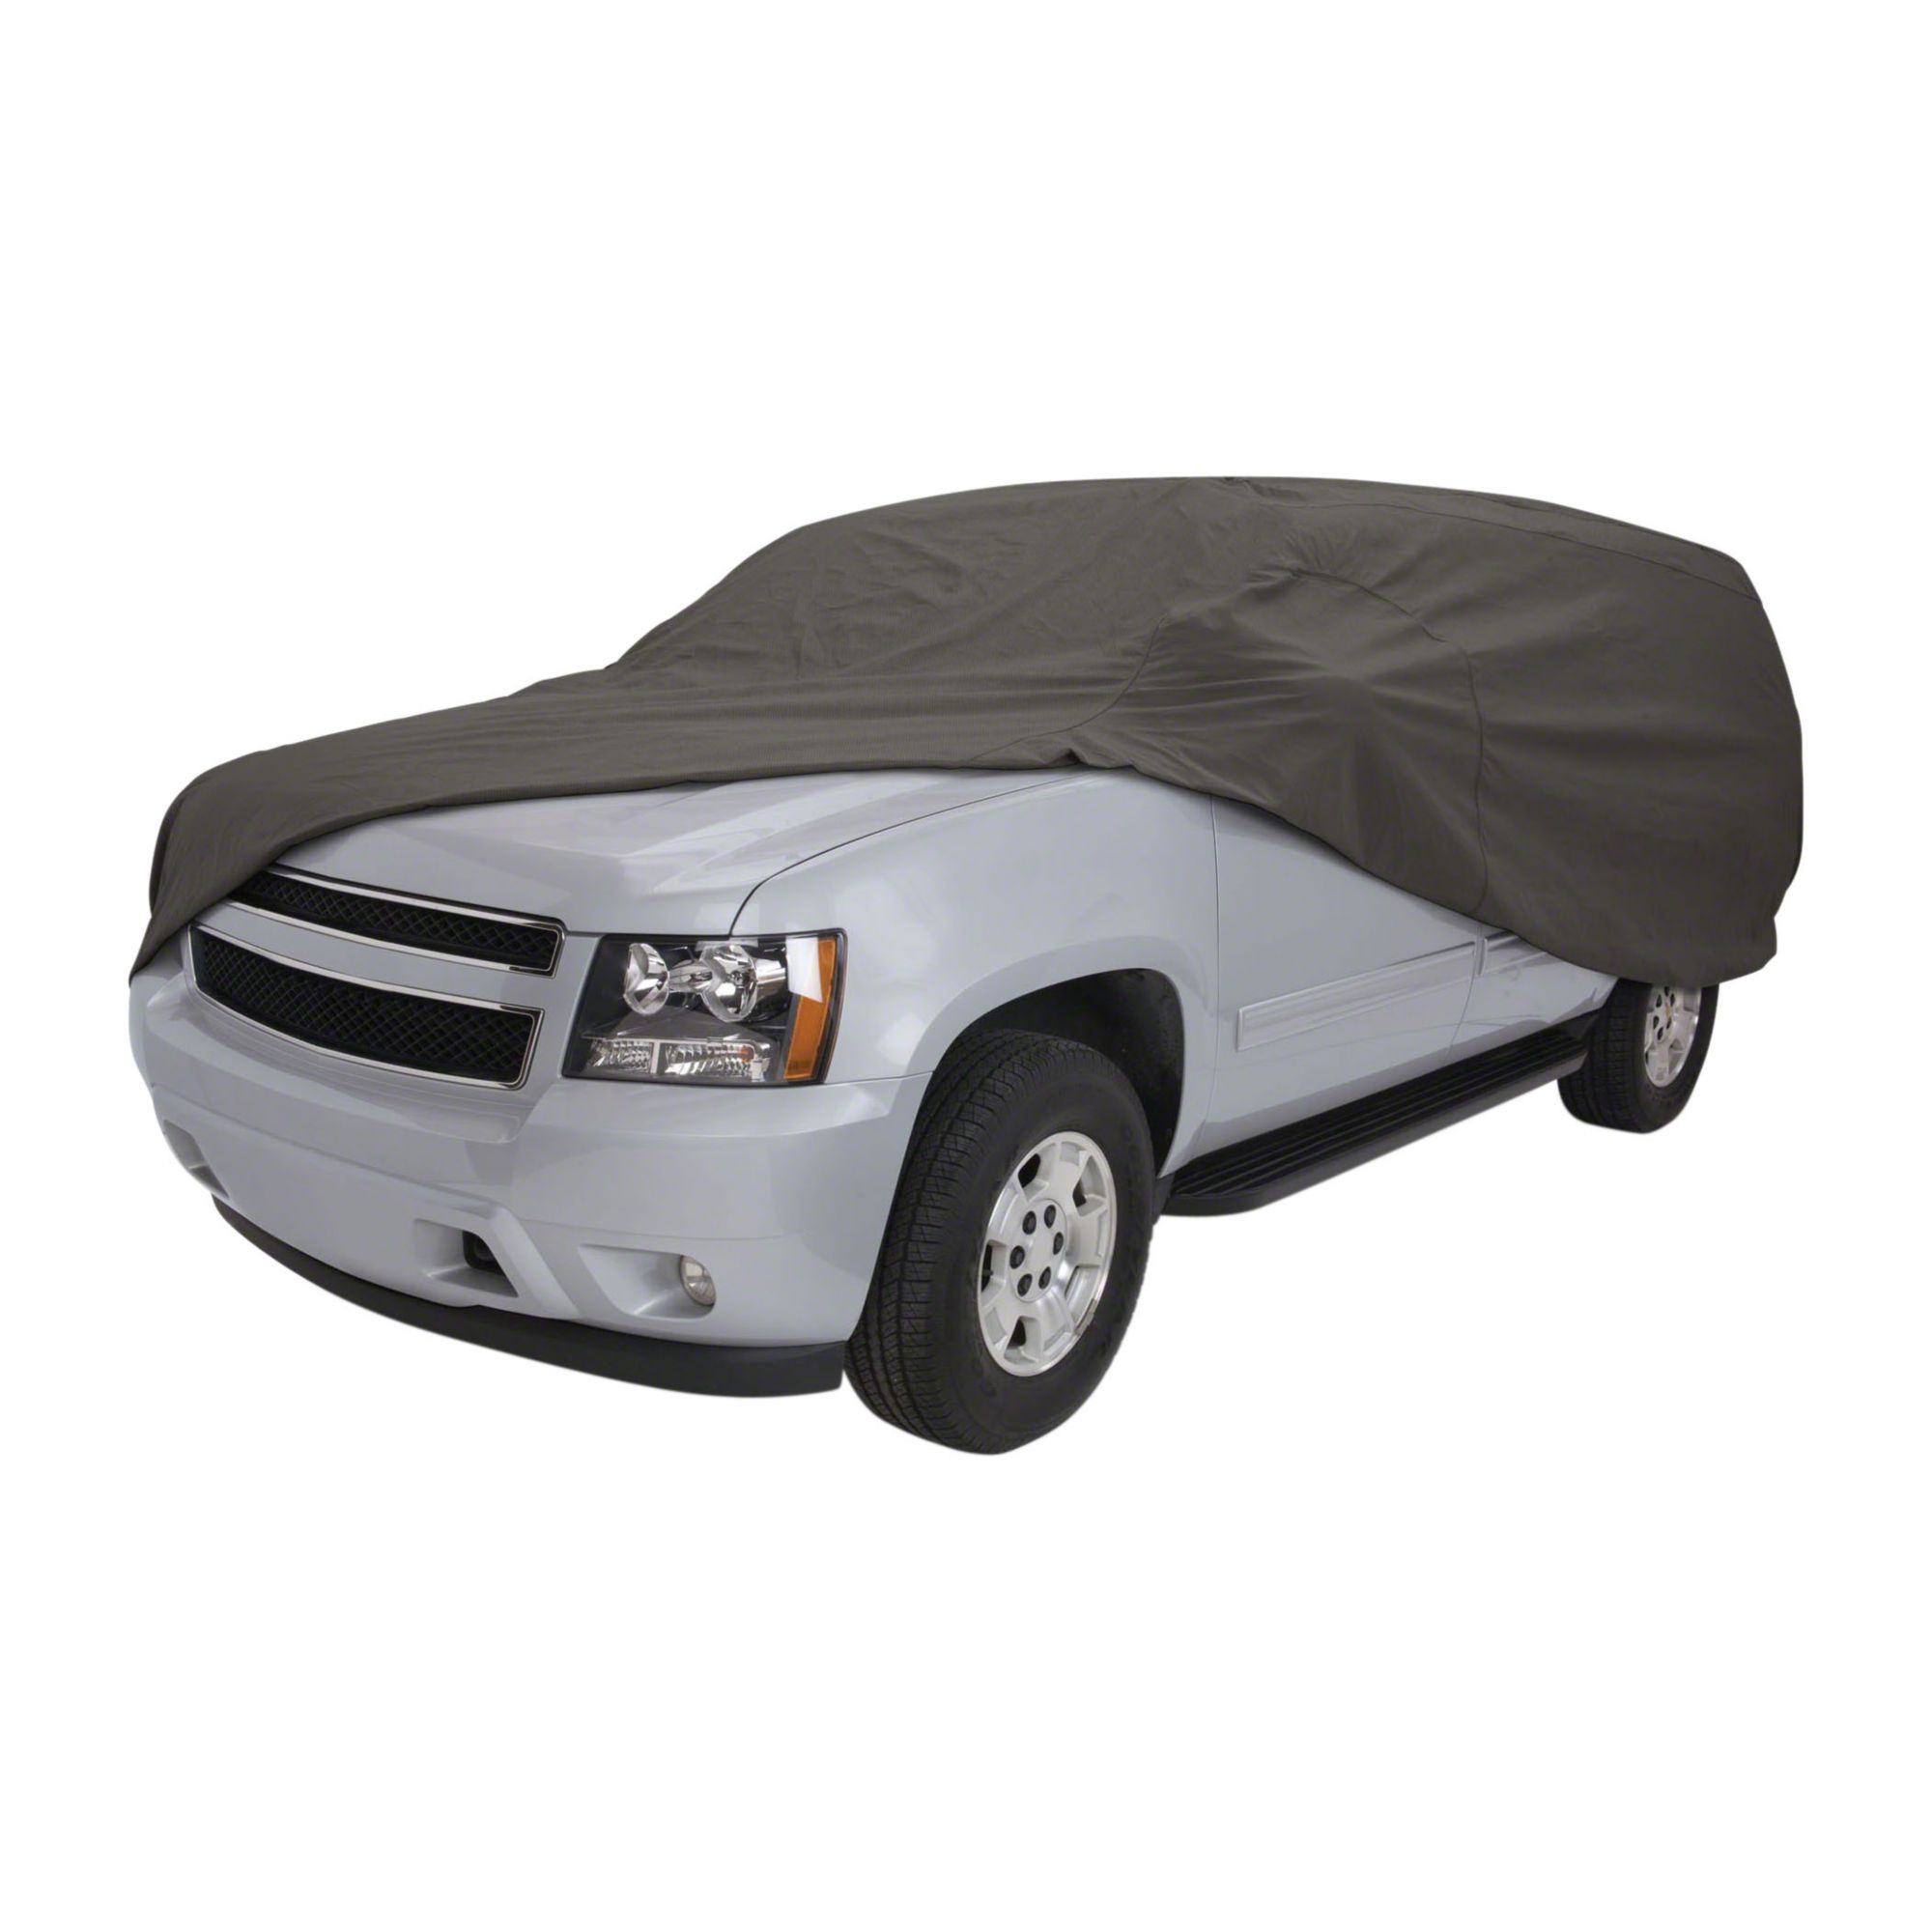 Classic Accessories Polypro 3 Full-Size SUV/Pickup Truck Cover